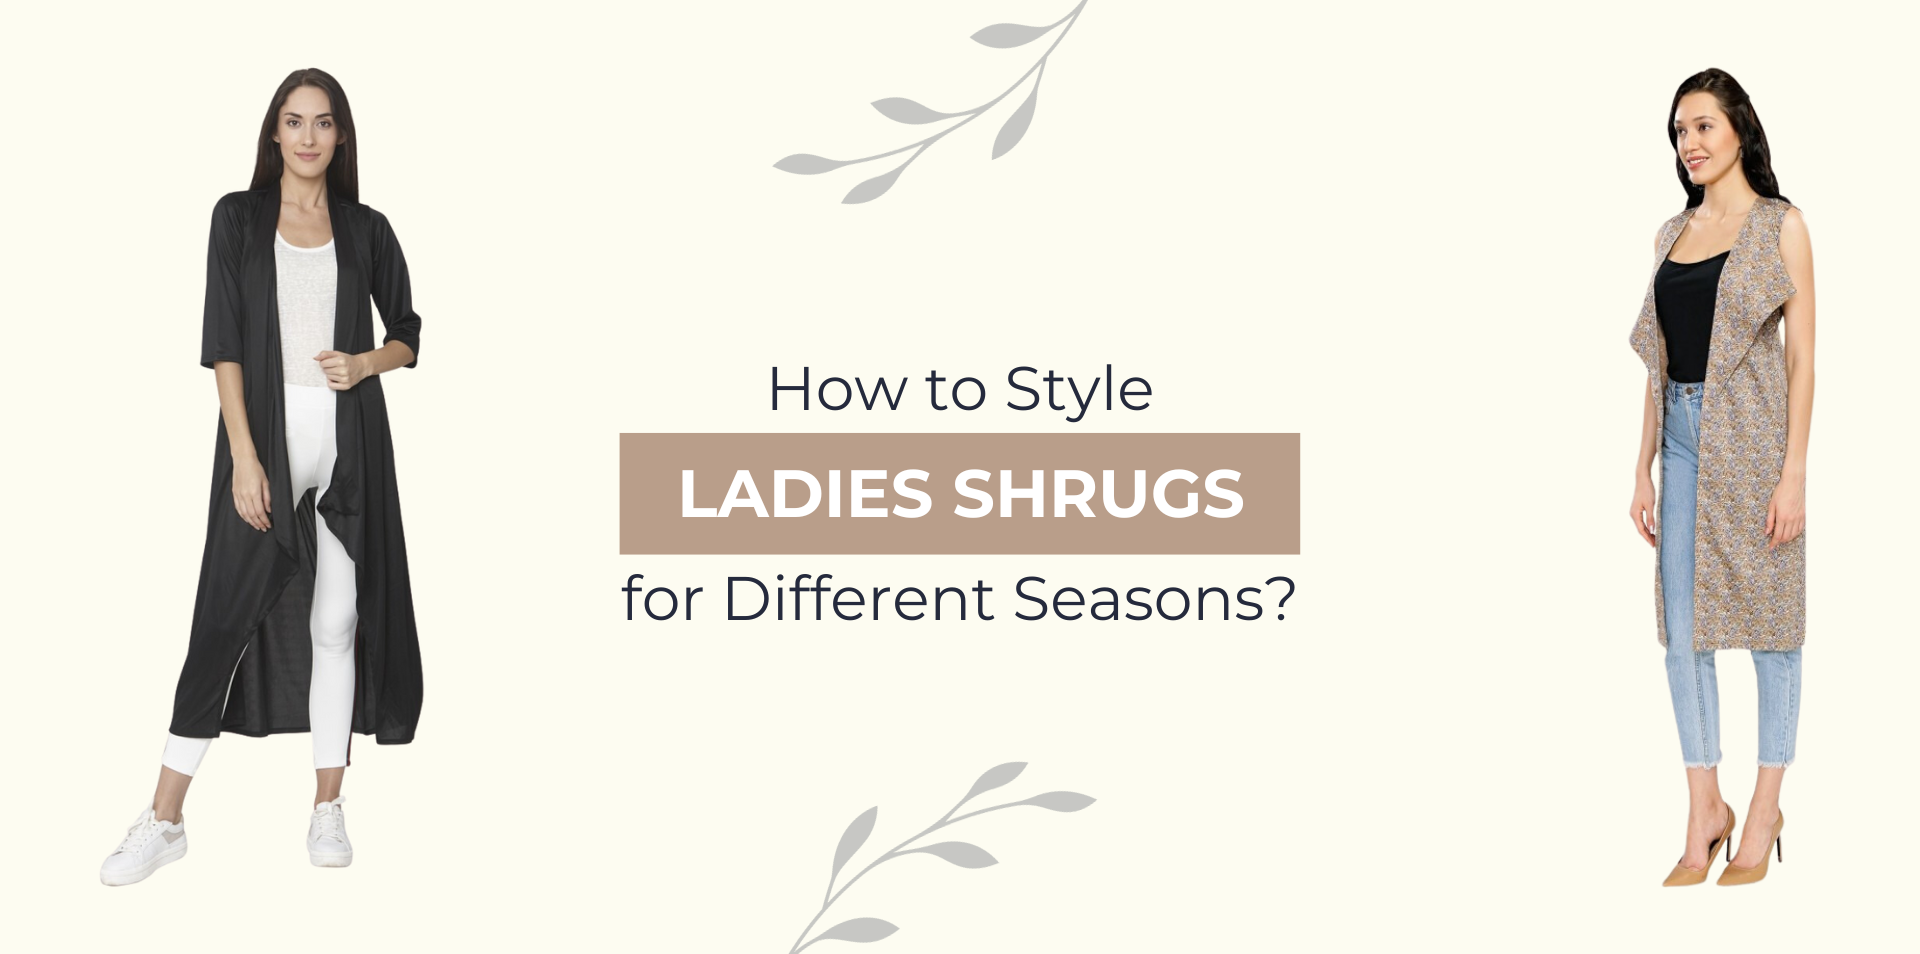 How to Style Ladies' Shrugs for Different Seasons?